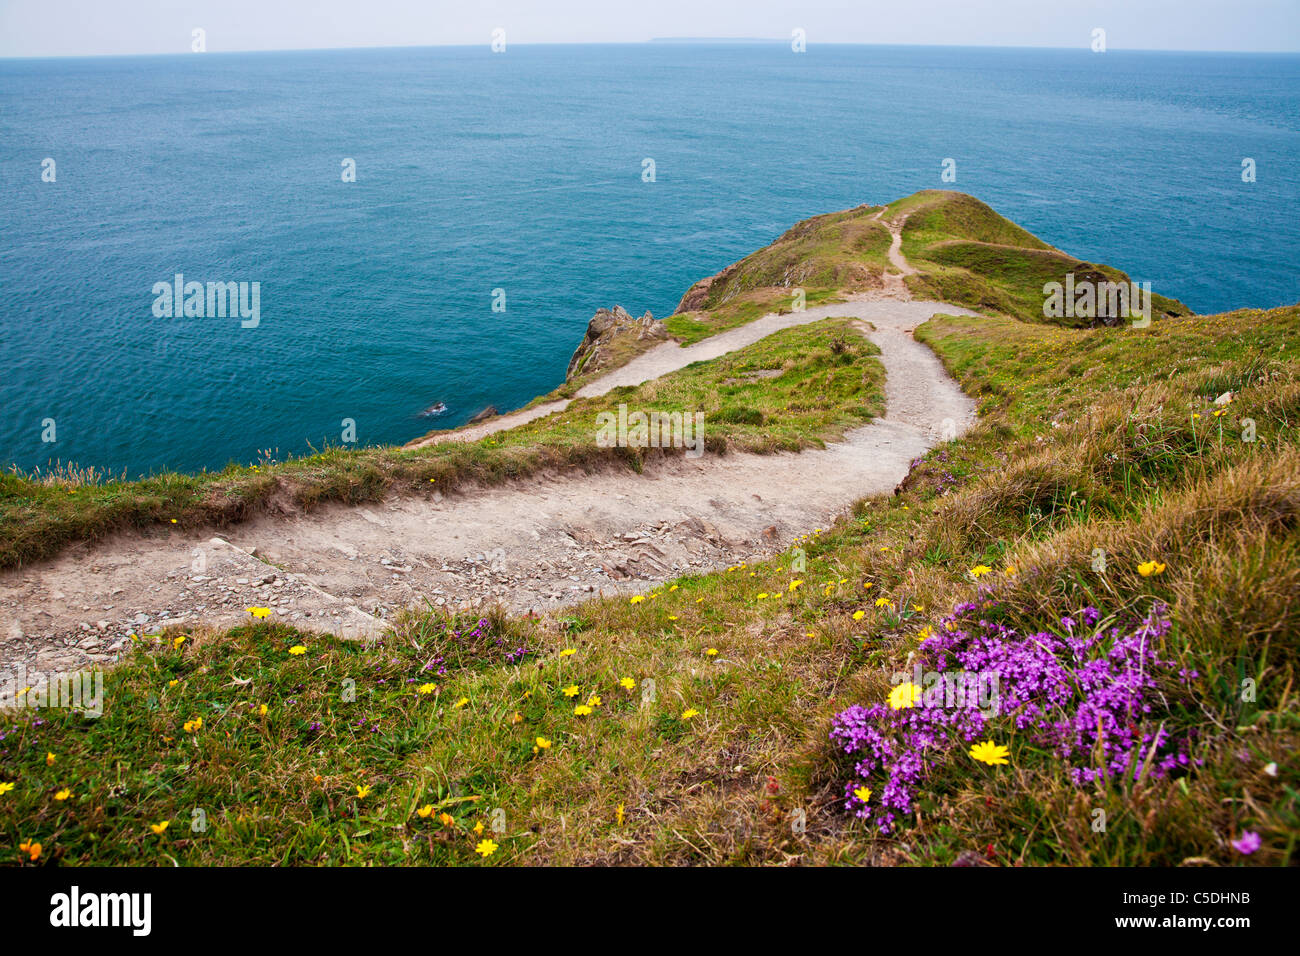 View of Baggy Point a headland near Croyde, North Devon, England, UK with Lundy Island in the distance. Stock Photo